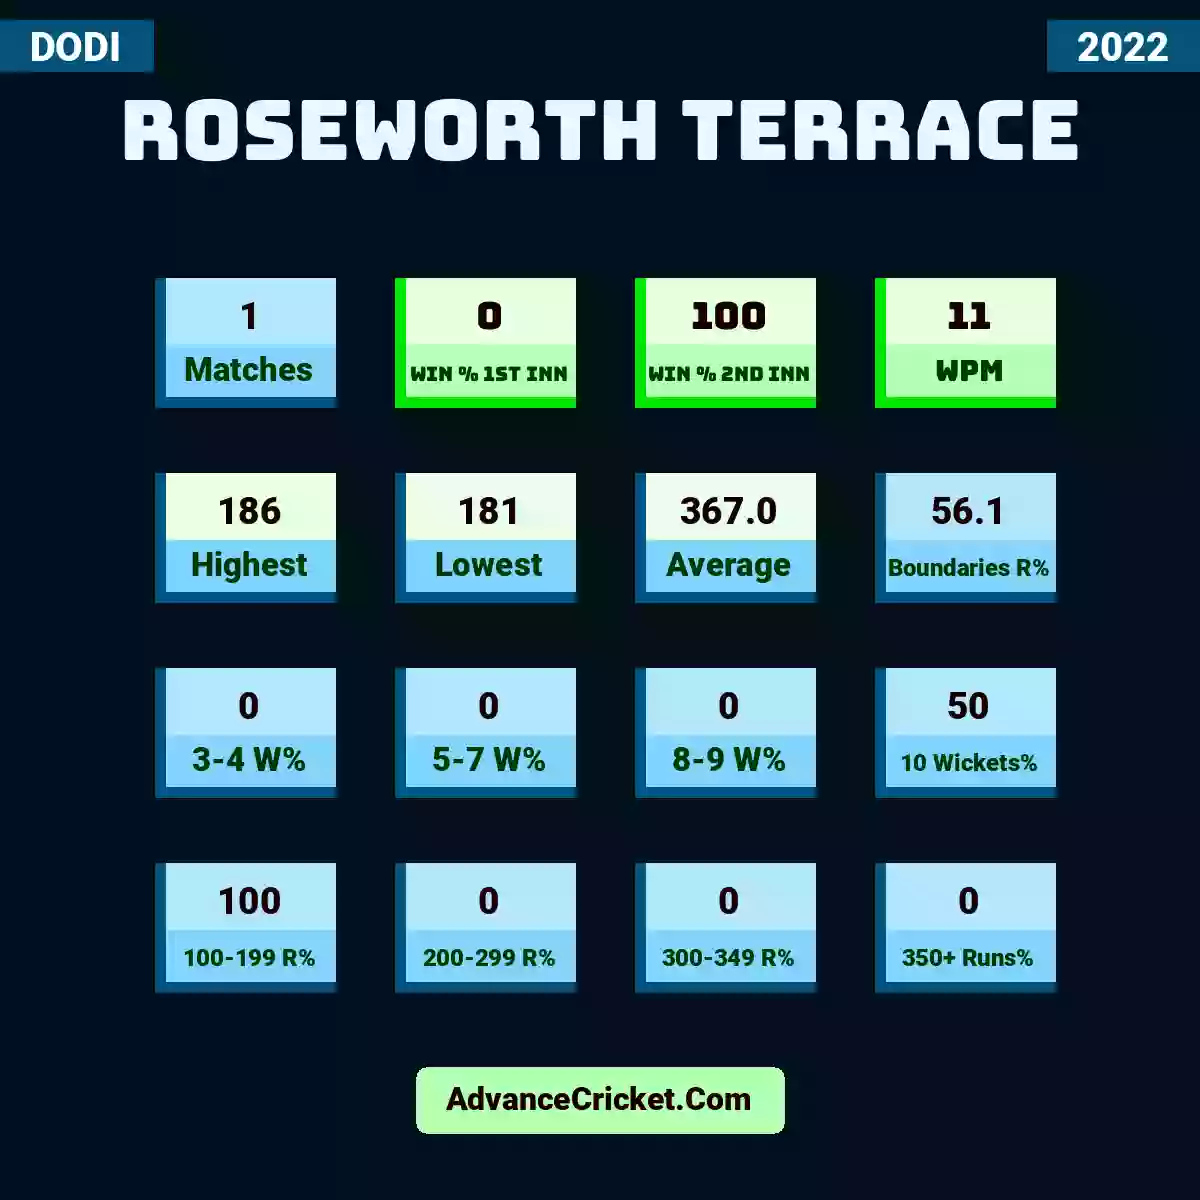 Image showing Roseworth Terrace with Matches: 1, Win % 1st Inn: 0, Win % 2nd Inn: 100, WPM: 11, Highest: 186, Lowest: 181, Average: 367.0, Boundaries R%: 56.1, 3-4 W%: 0, 5-7 W%: 0, 8-9 W%: 0, 10 Wickets%: 50, 100-199 R%: 100, 200-299 R%: 0, 300-349 R%: 0, 350+ Runs%: 0.